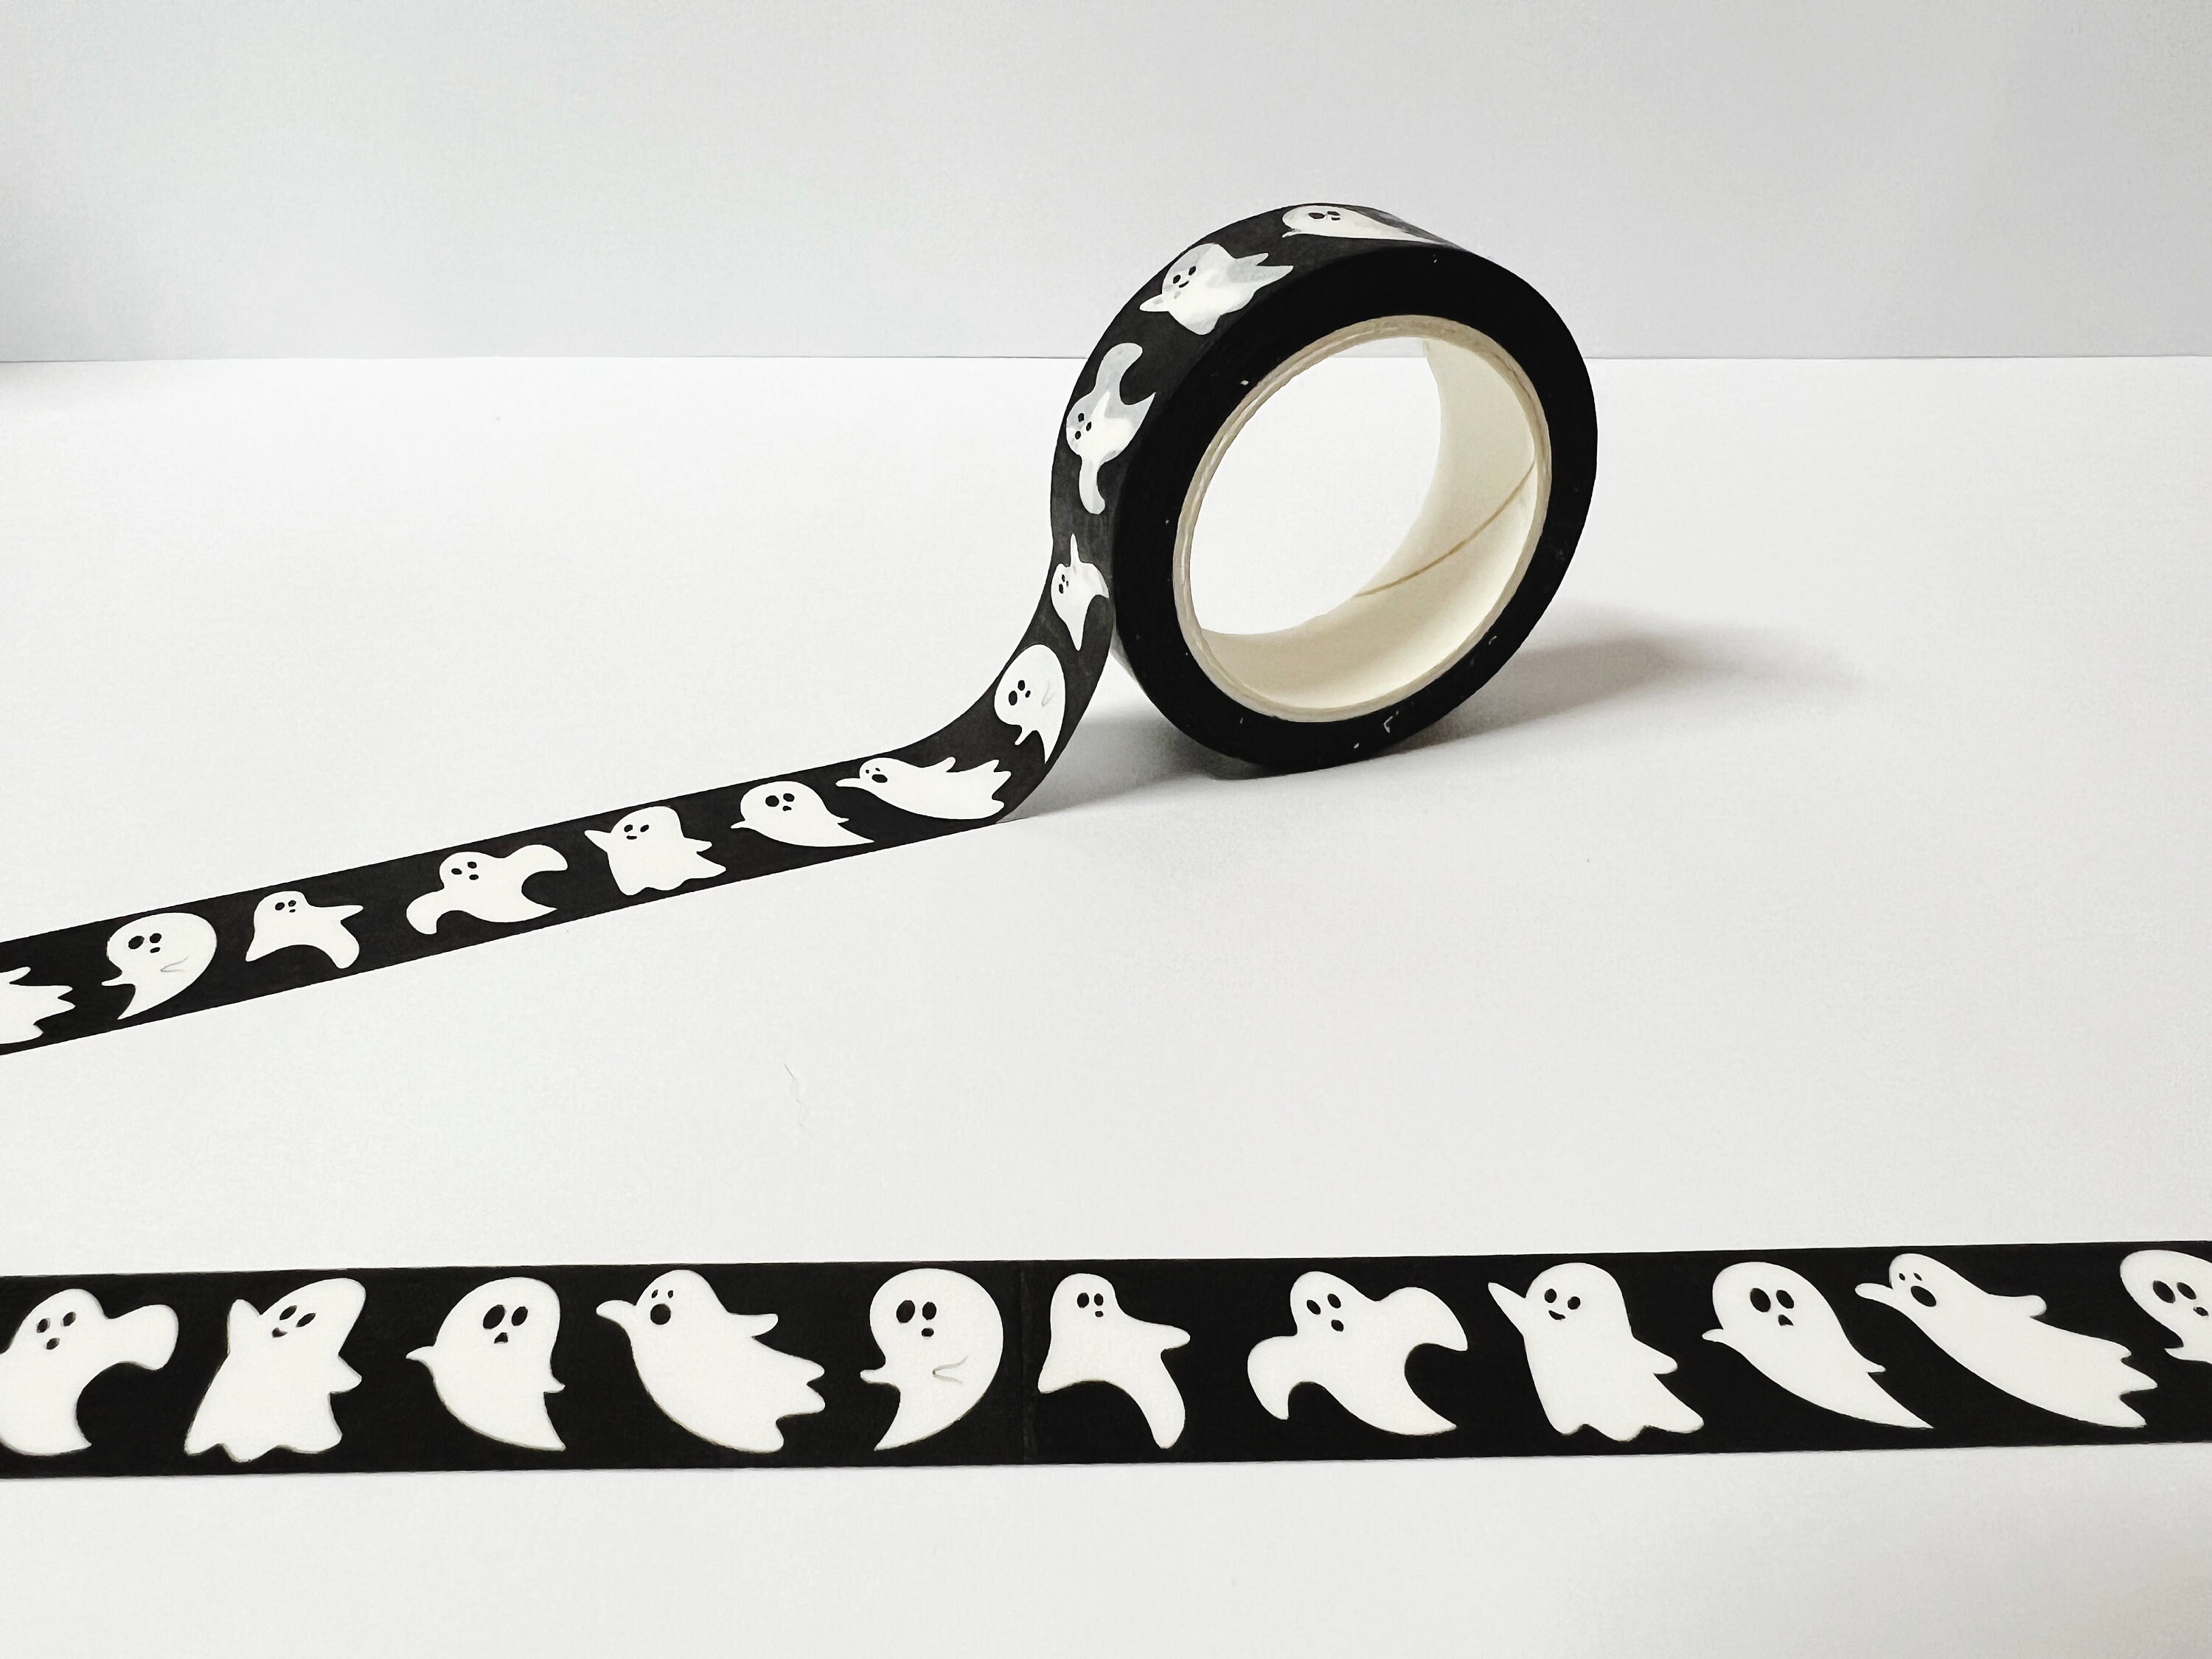 BLACK Reflective Vinyl, Oracal Oralite Top Quality Tape, Self Adhesive,  Tape or Sheets, Choose Your Size 